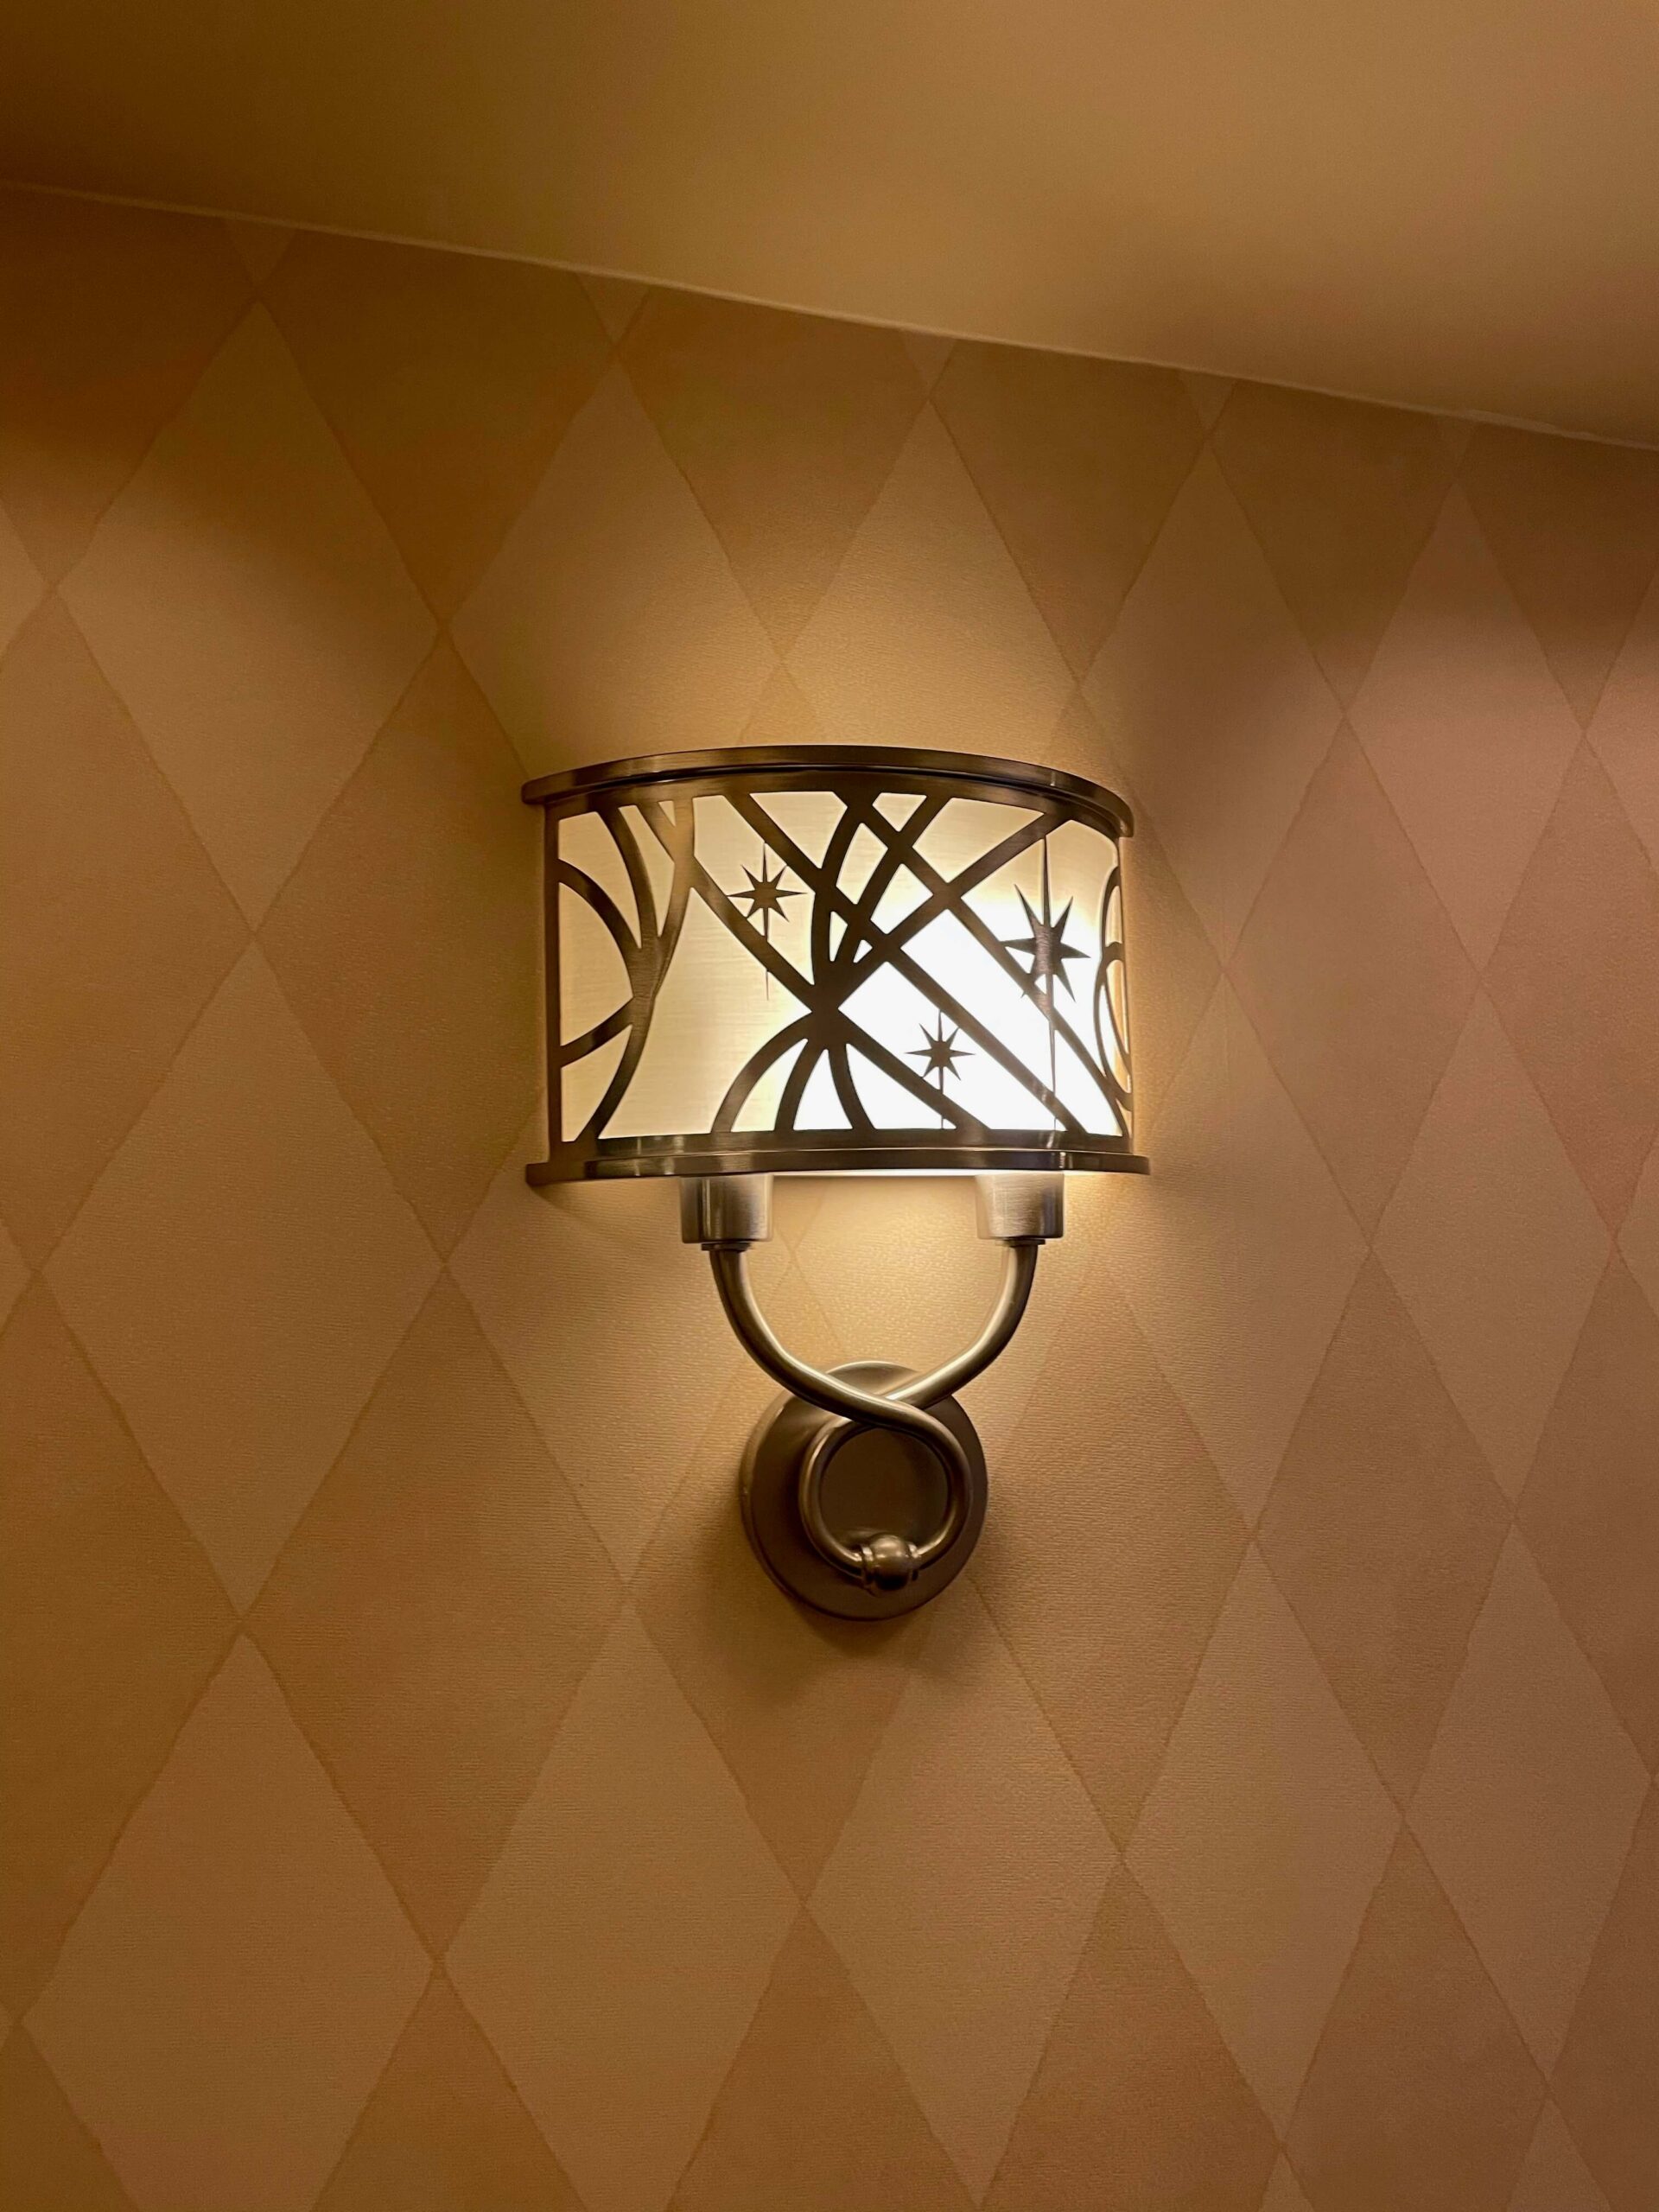 detailed wall sconce in the frontier tower of the disneyland hotel